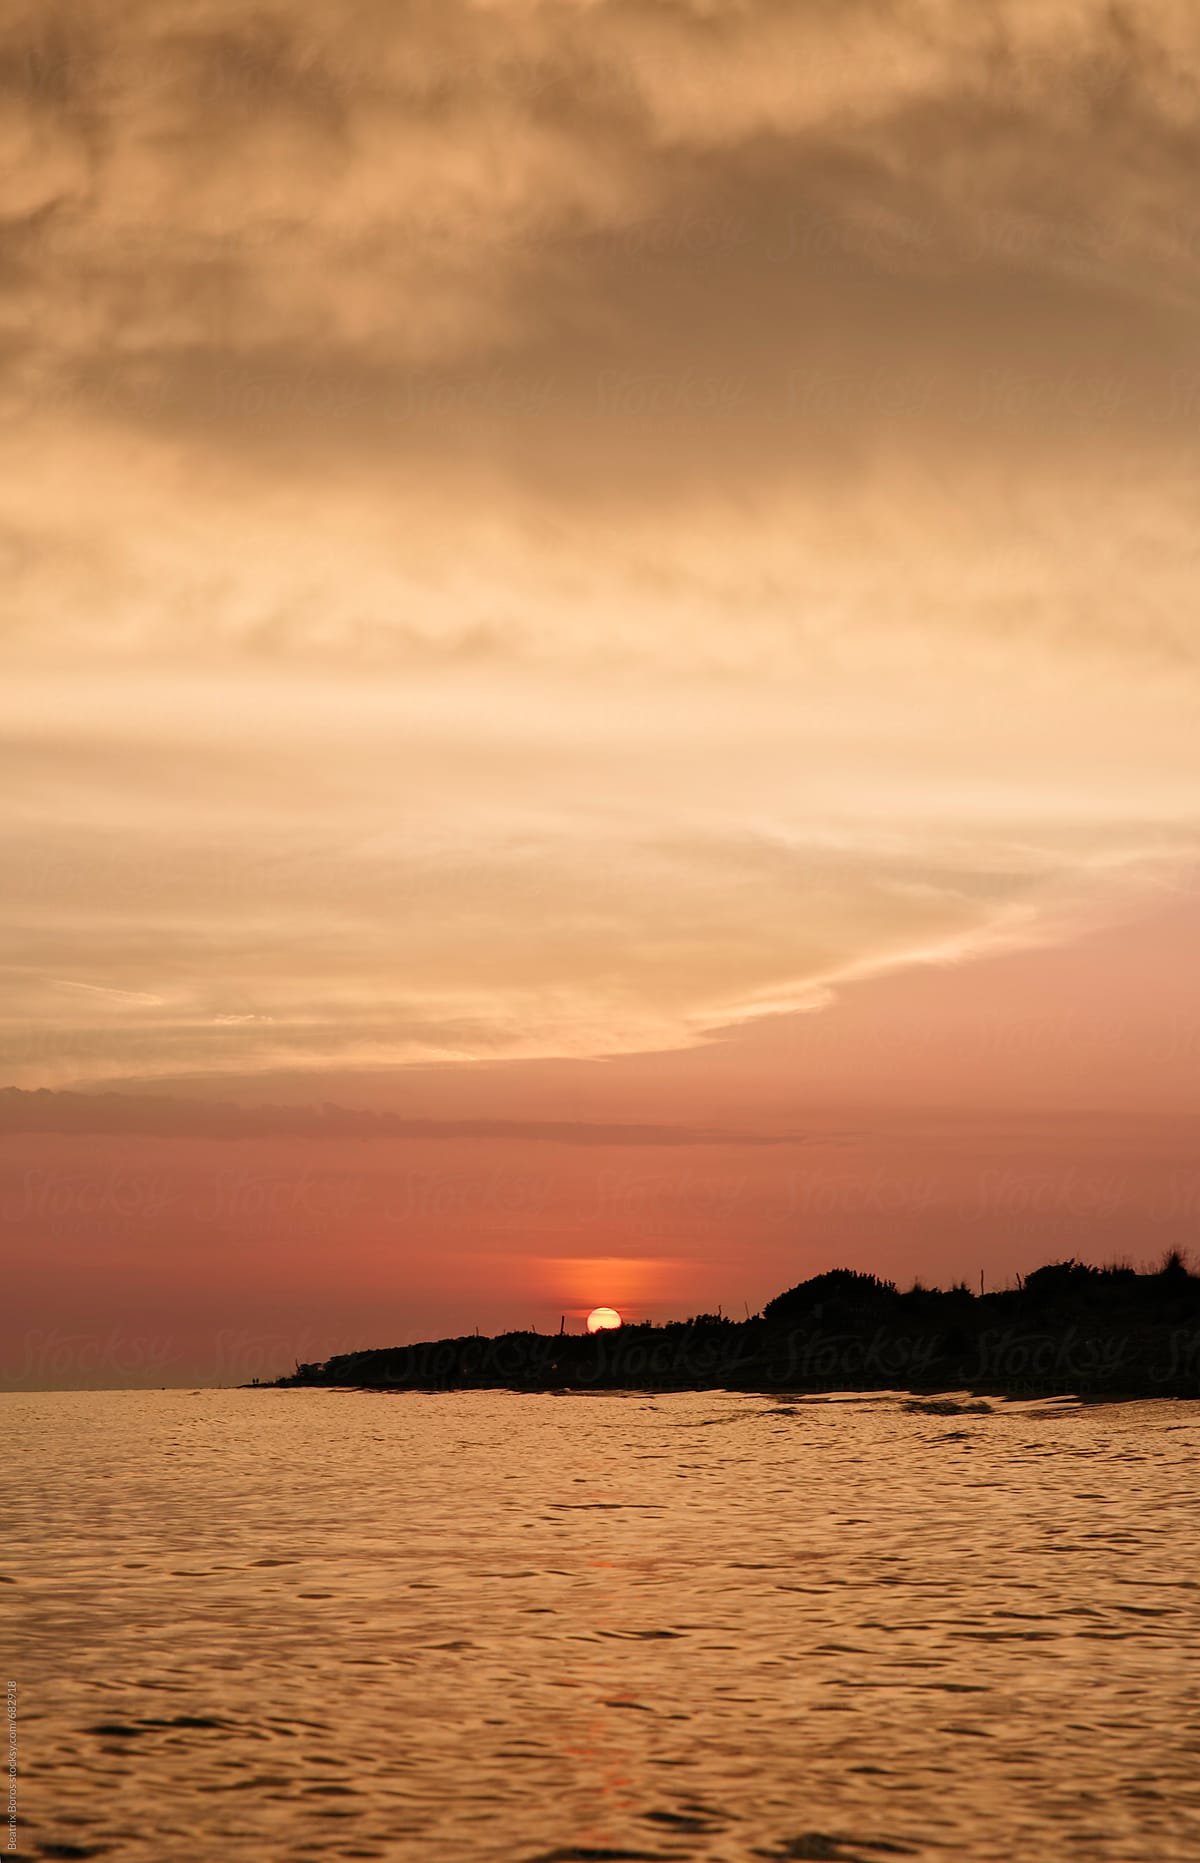 Vertical photo of a Sunset on the Mediterranean Sea